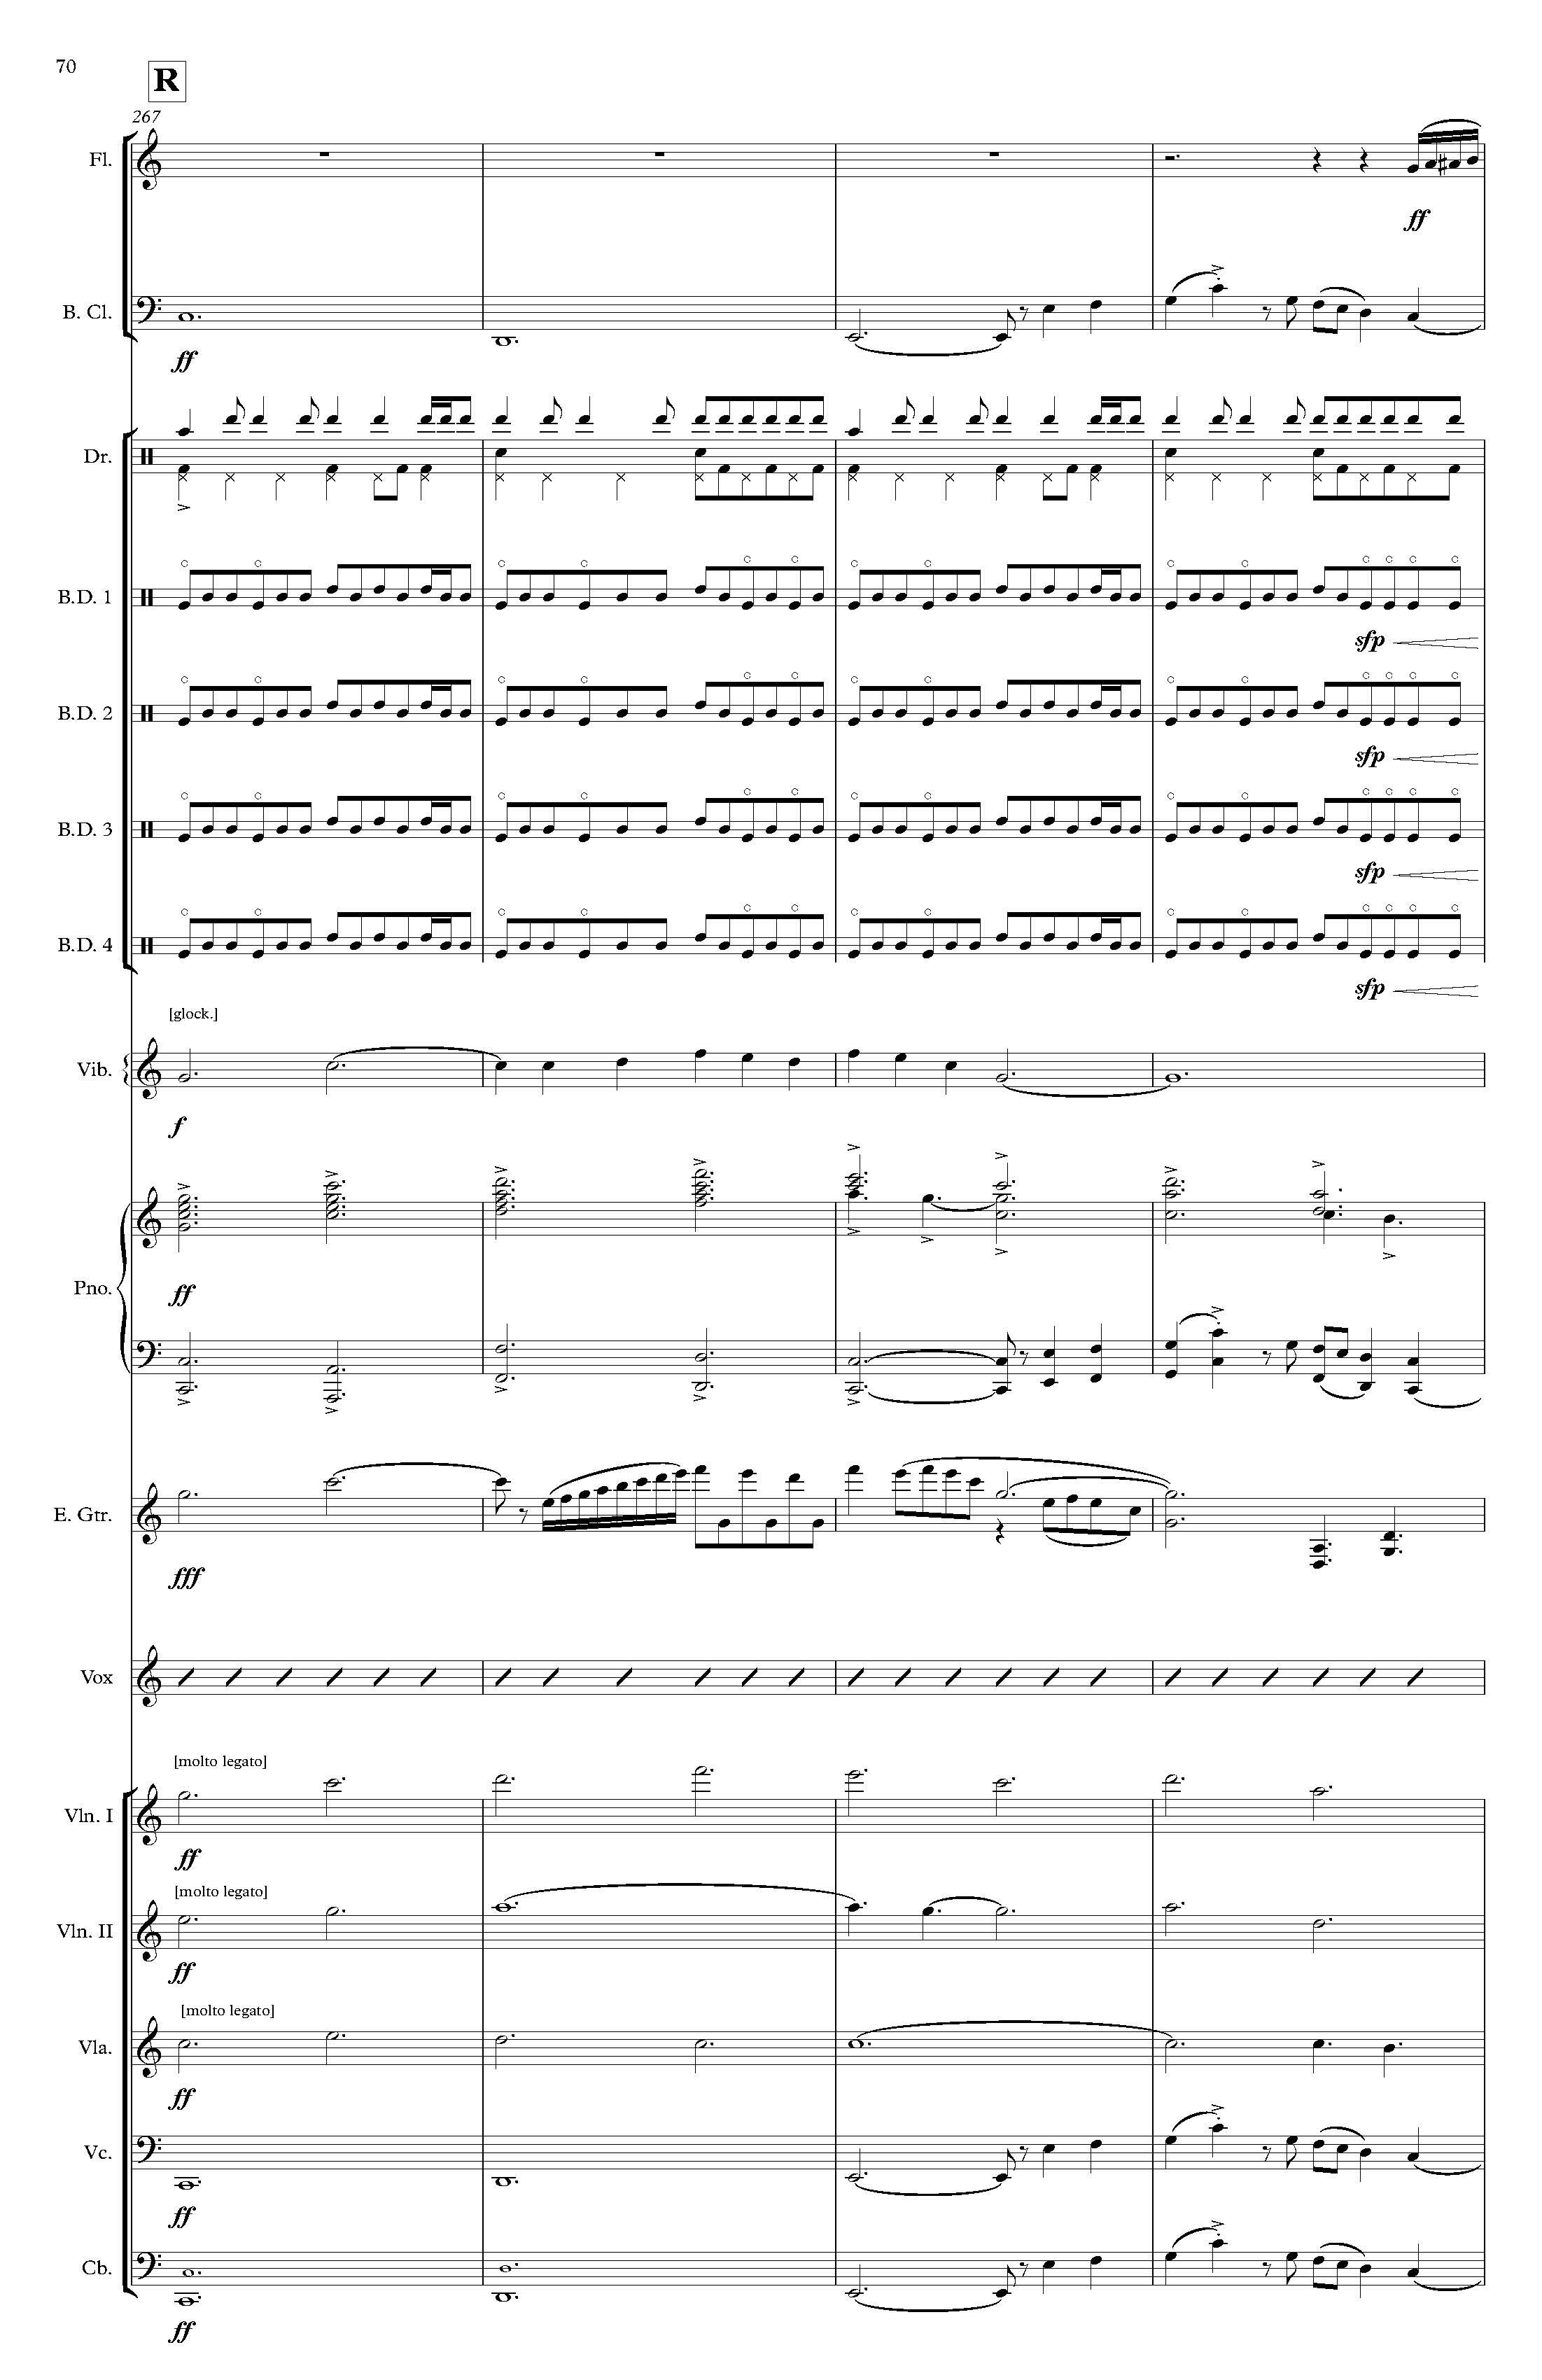 The Rembrandt of Avenue A - Complete Score_Page_76.jpg